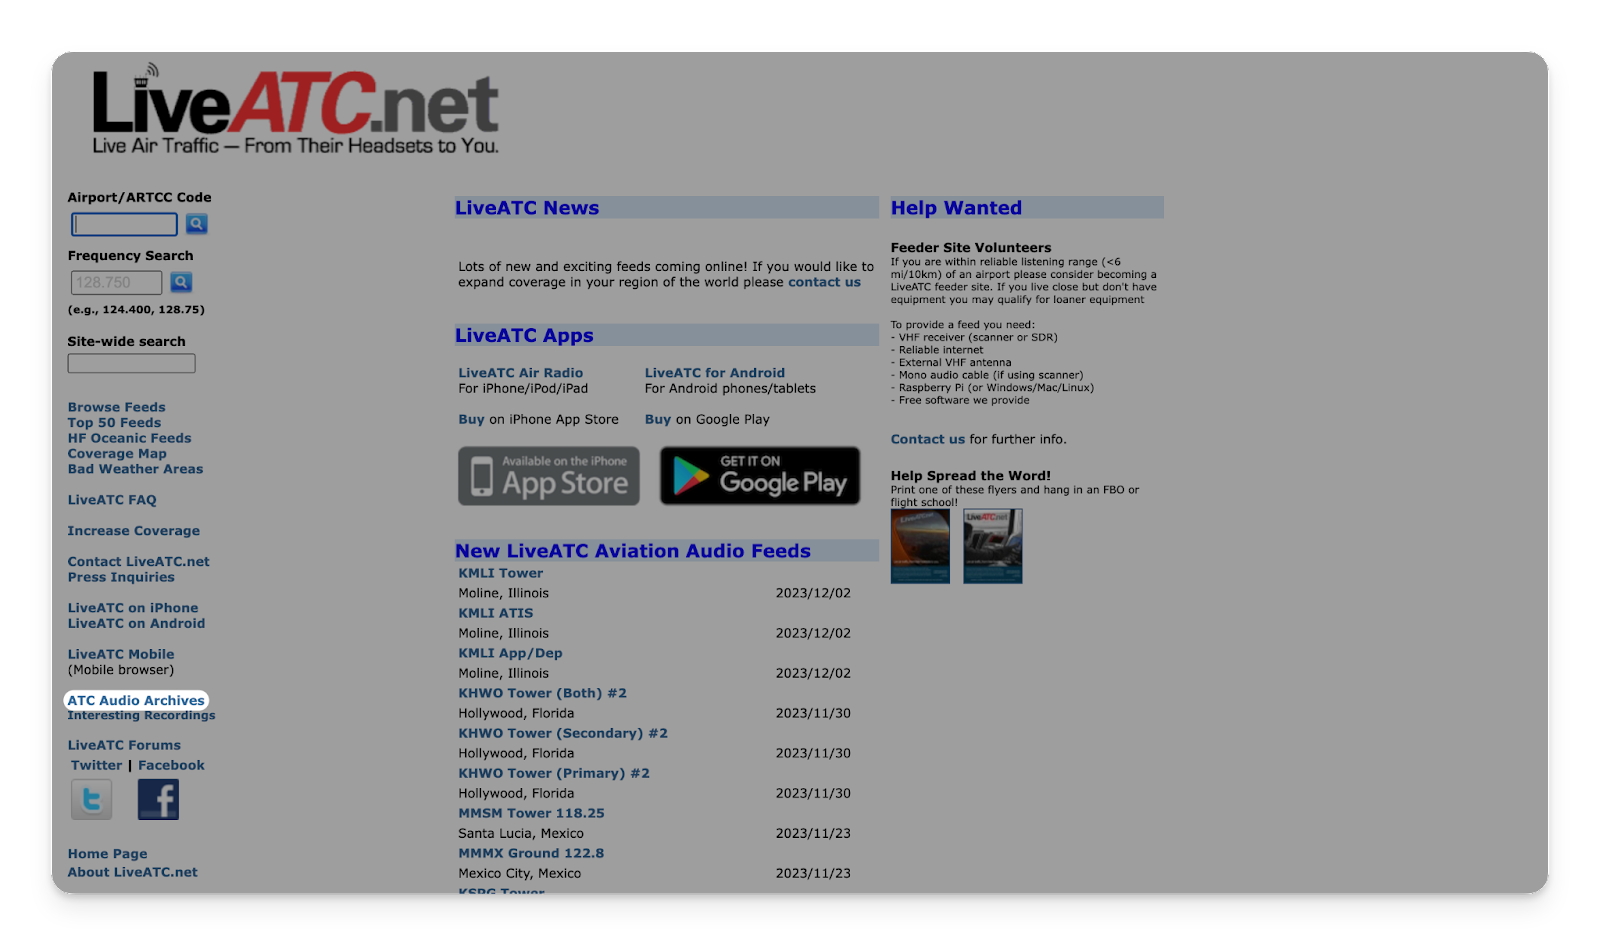 A screenshot of the LiveATC website with the ATC Audio Archives button highlighted.